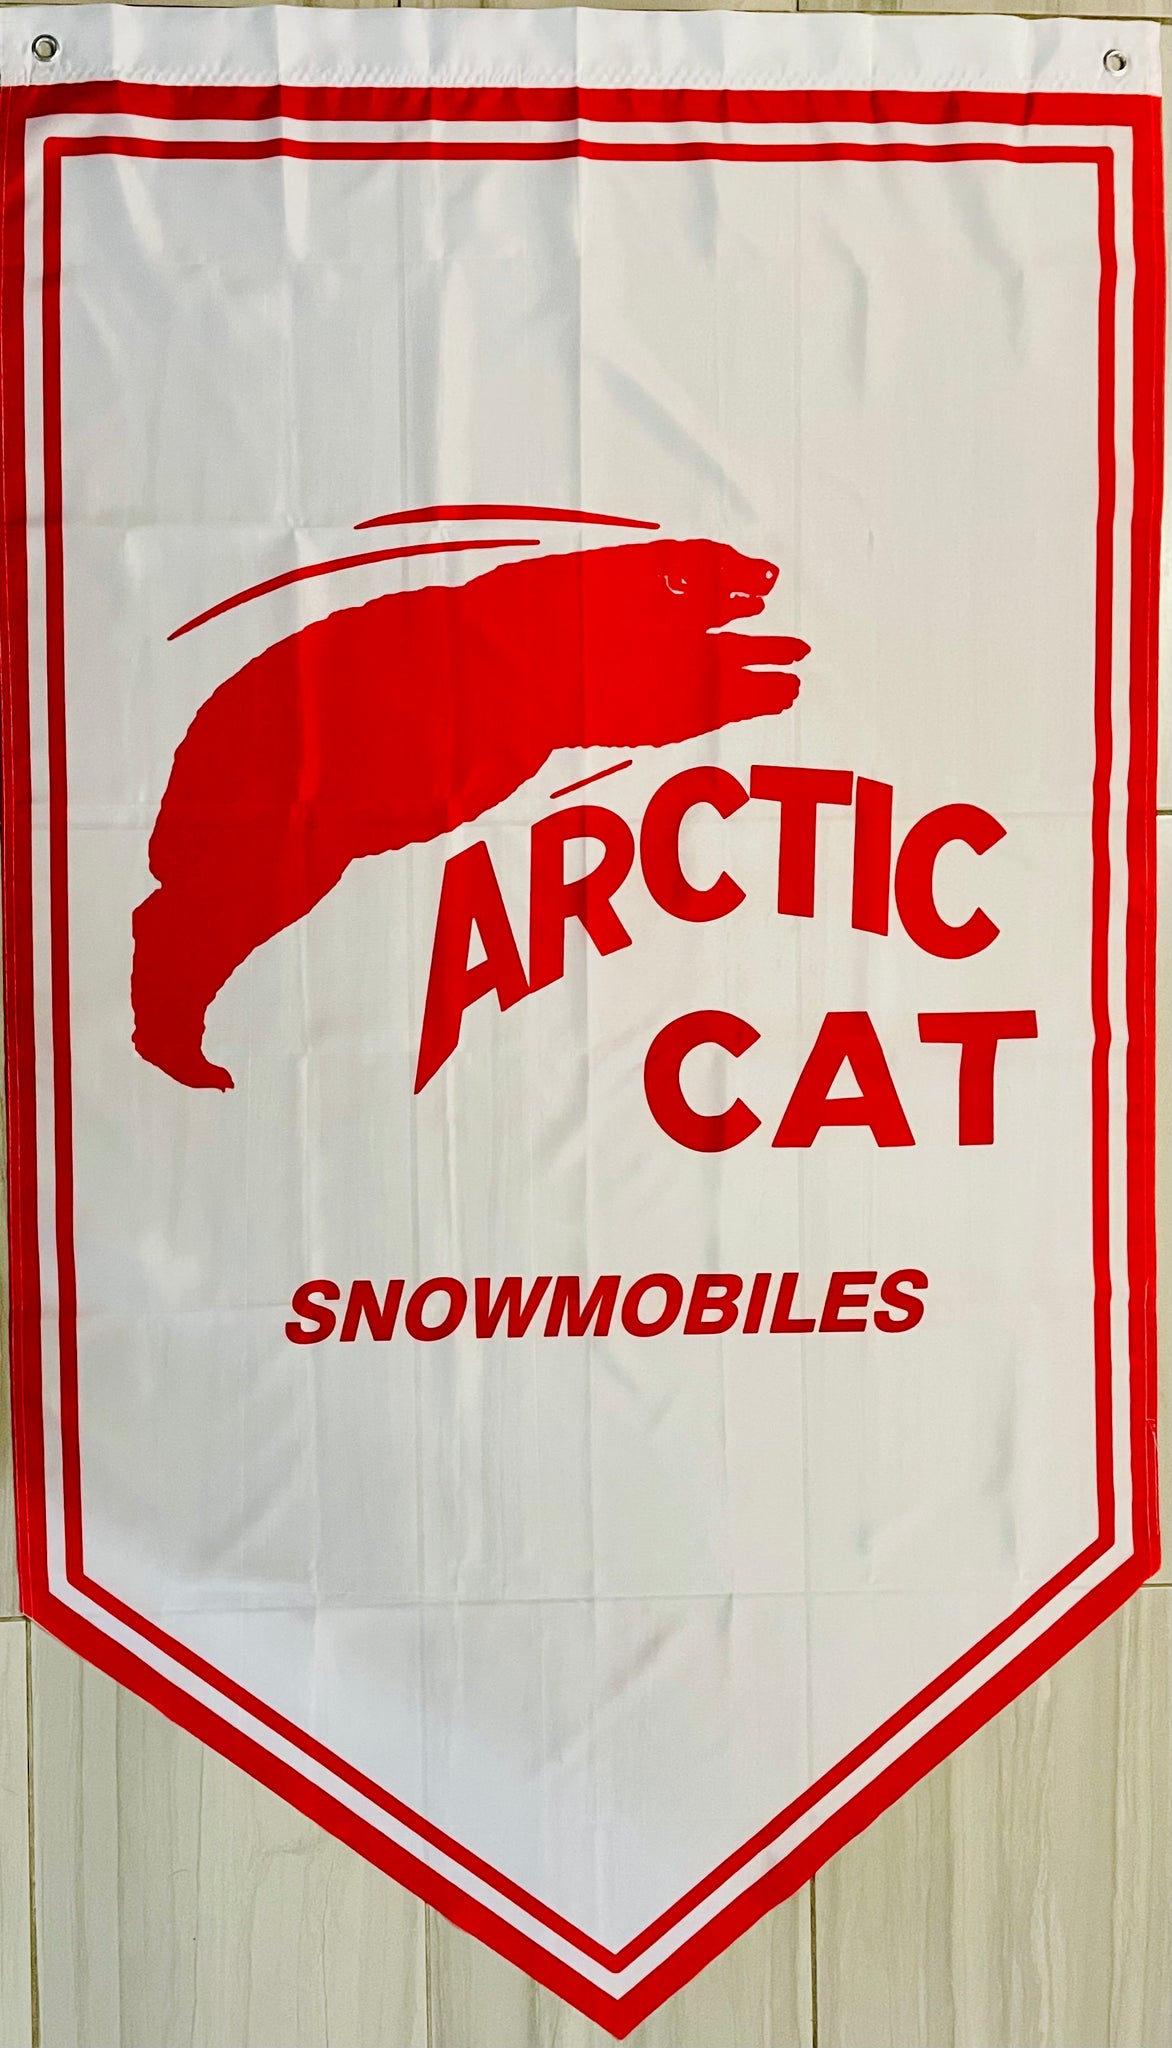 ARCTIC CAT SNOWMOBILES TRIANGLE 3x5ft FLAG BANNER MAN CAVE GARAGE